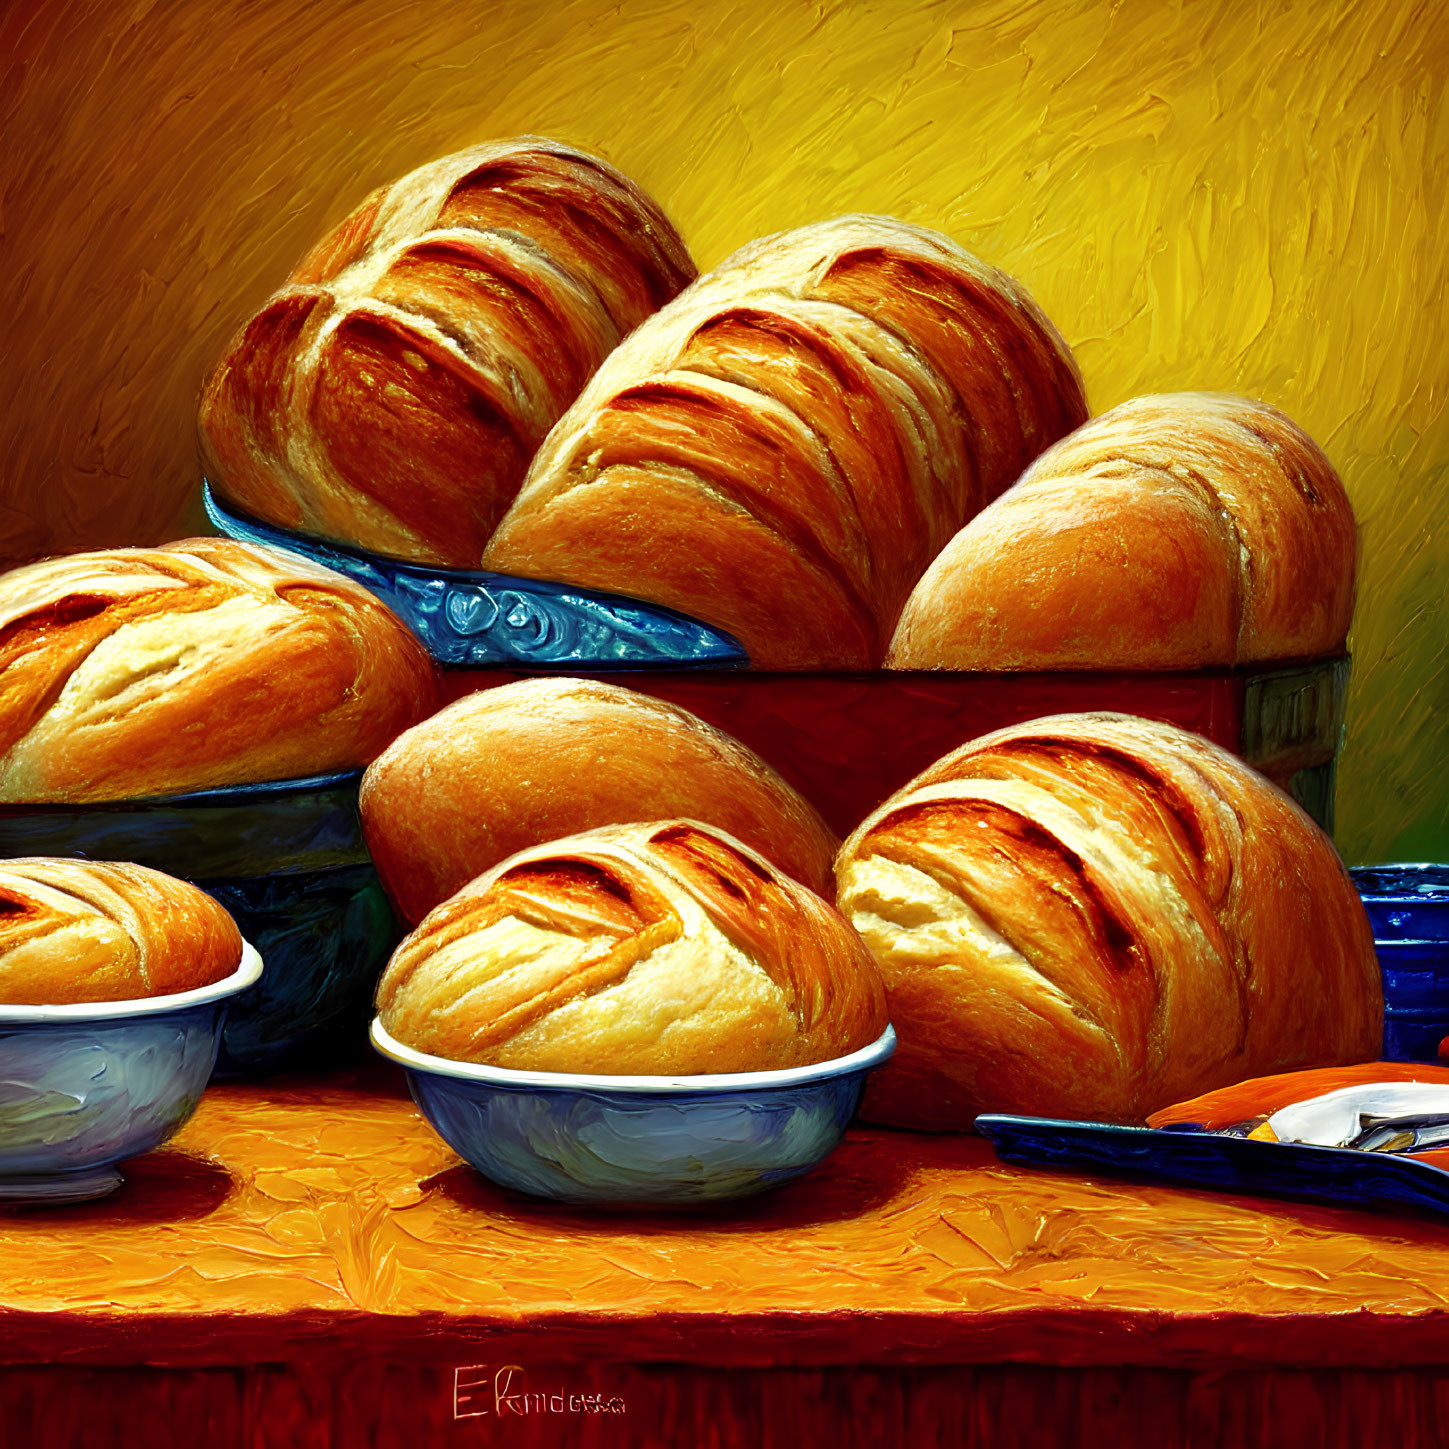 Vibrant painting of crusty bread loaves and blue bowls on wooden surface